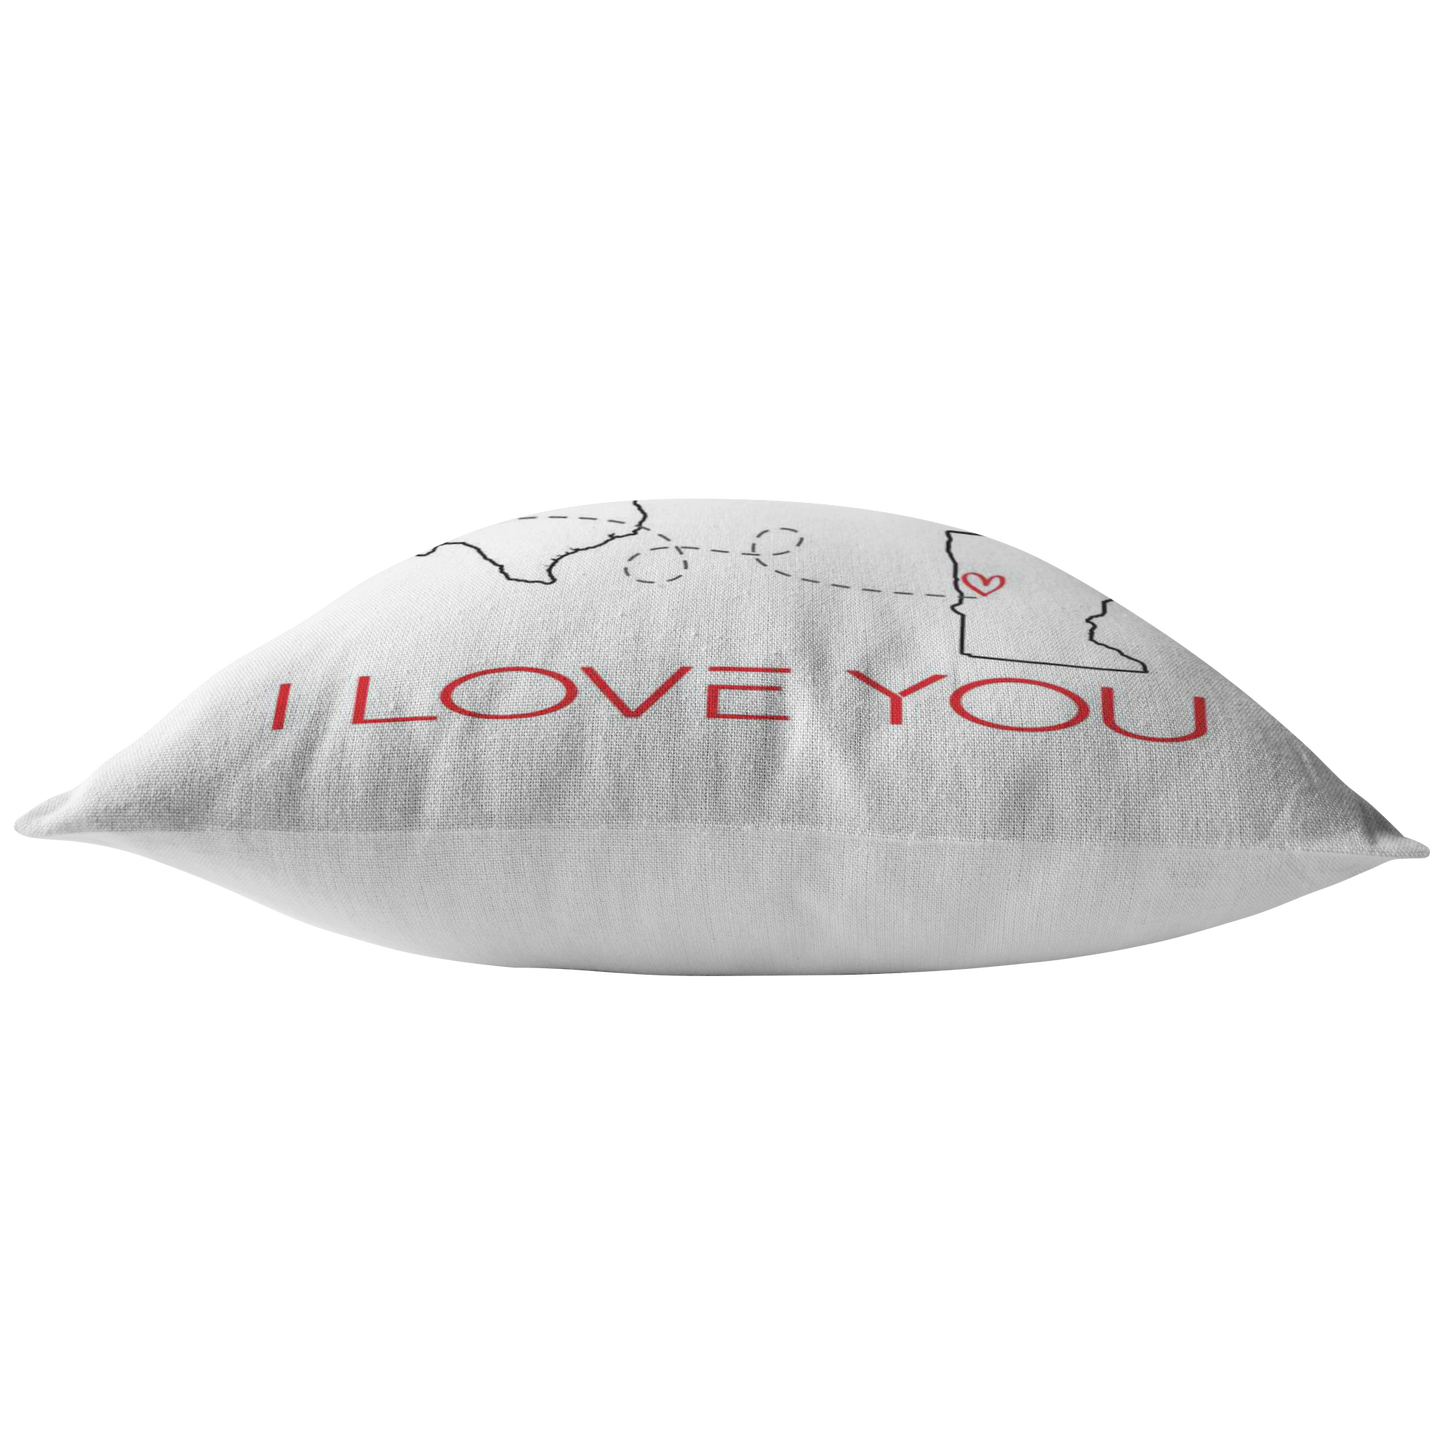 ND-pl20419529-sp-27520 - [ Texas | Minnesota | 1 ] (PI_ThrowPillowCovers) Mothers Day Gifts From Son - The Love Between Mother  Son